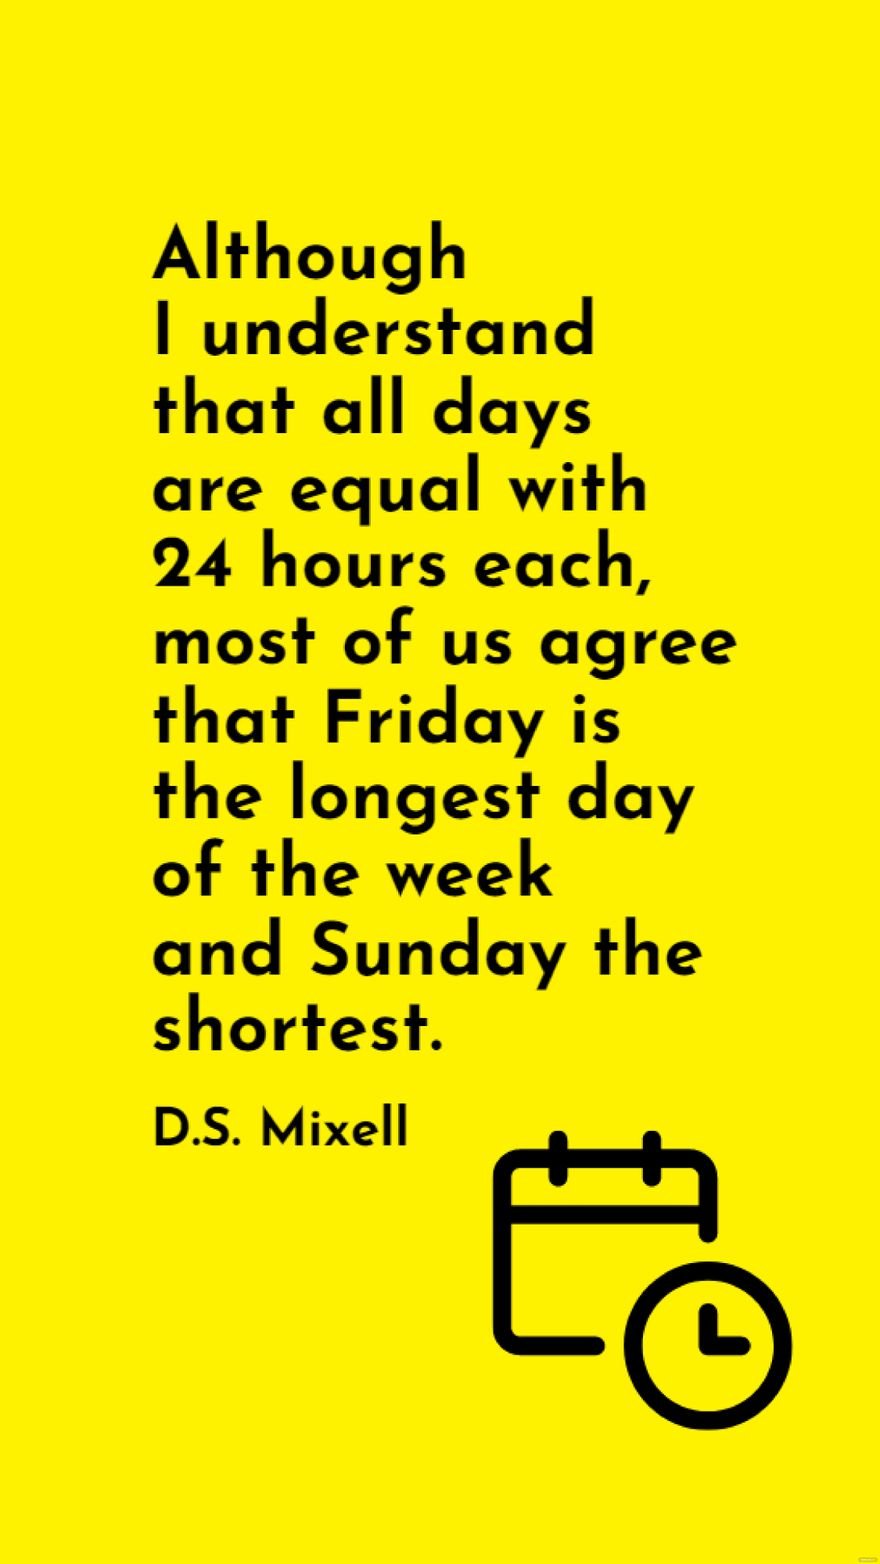 Free D.S. Mixell - Although I understand that all days are equal with 24 hours each, most of us agree that Friday is the longest day of the week and Sunday the shortest. in JPG